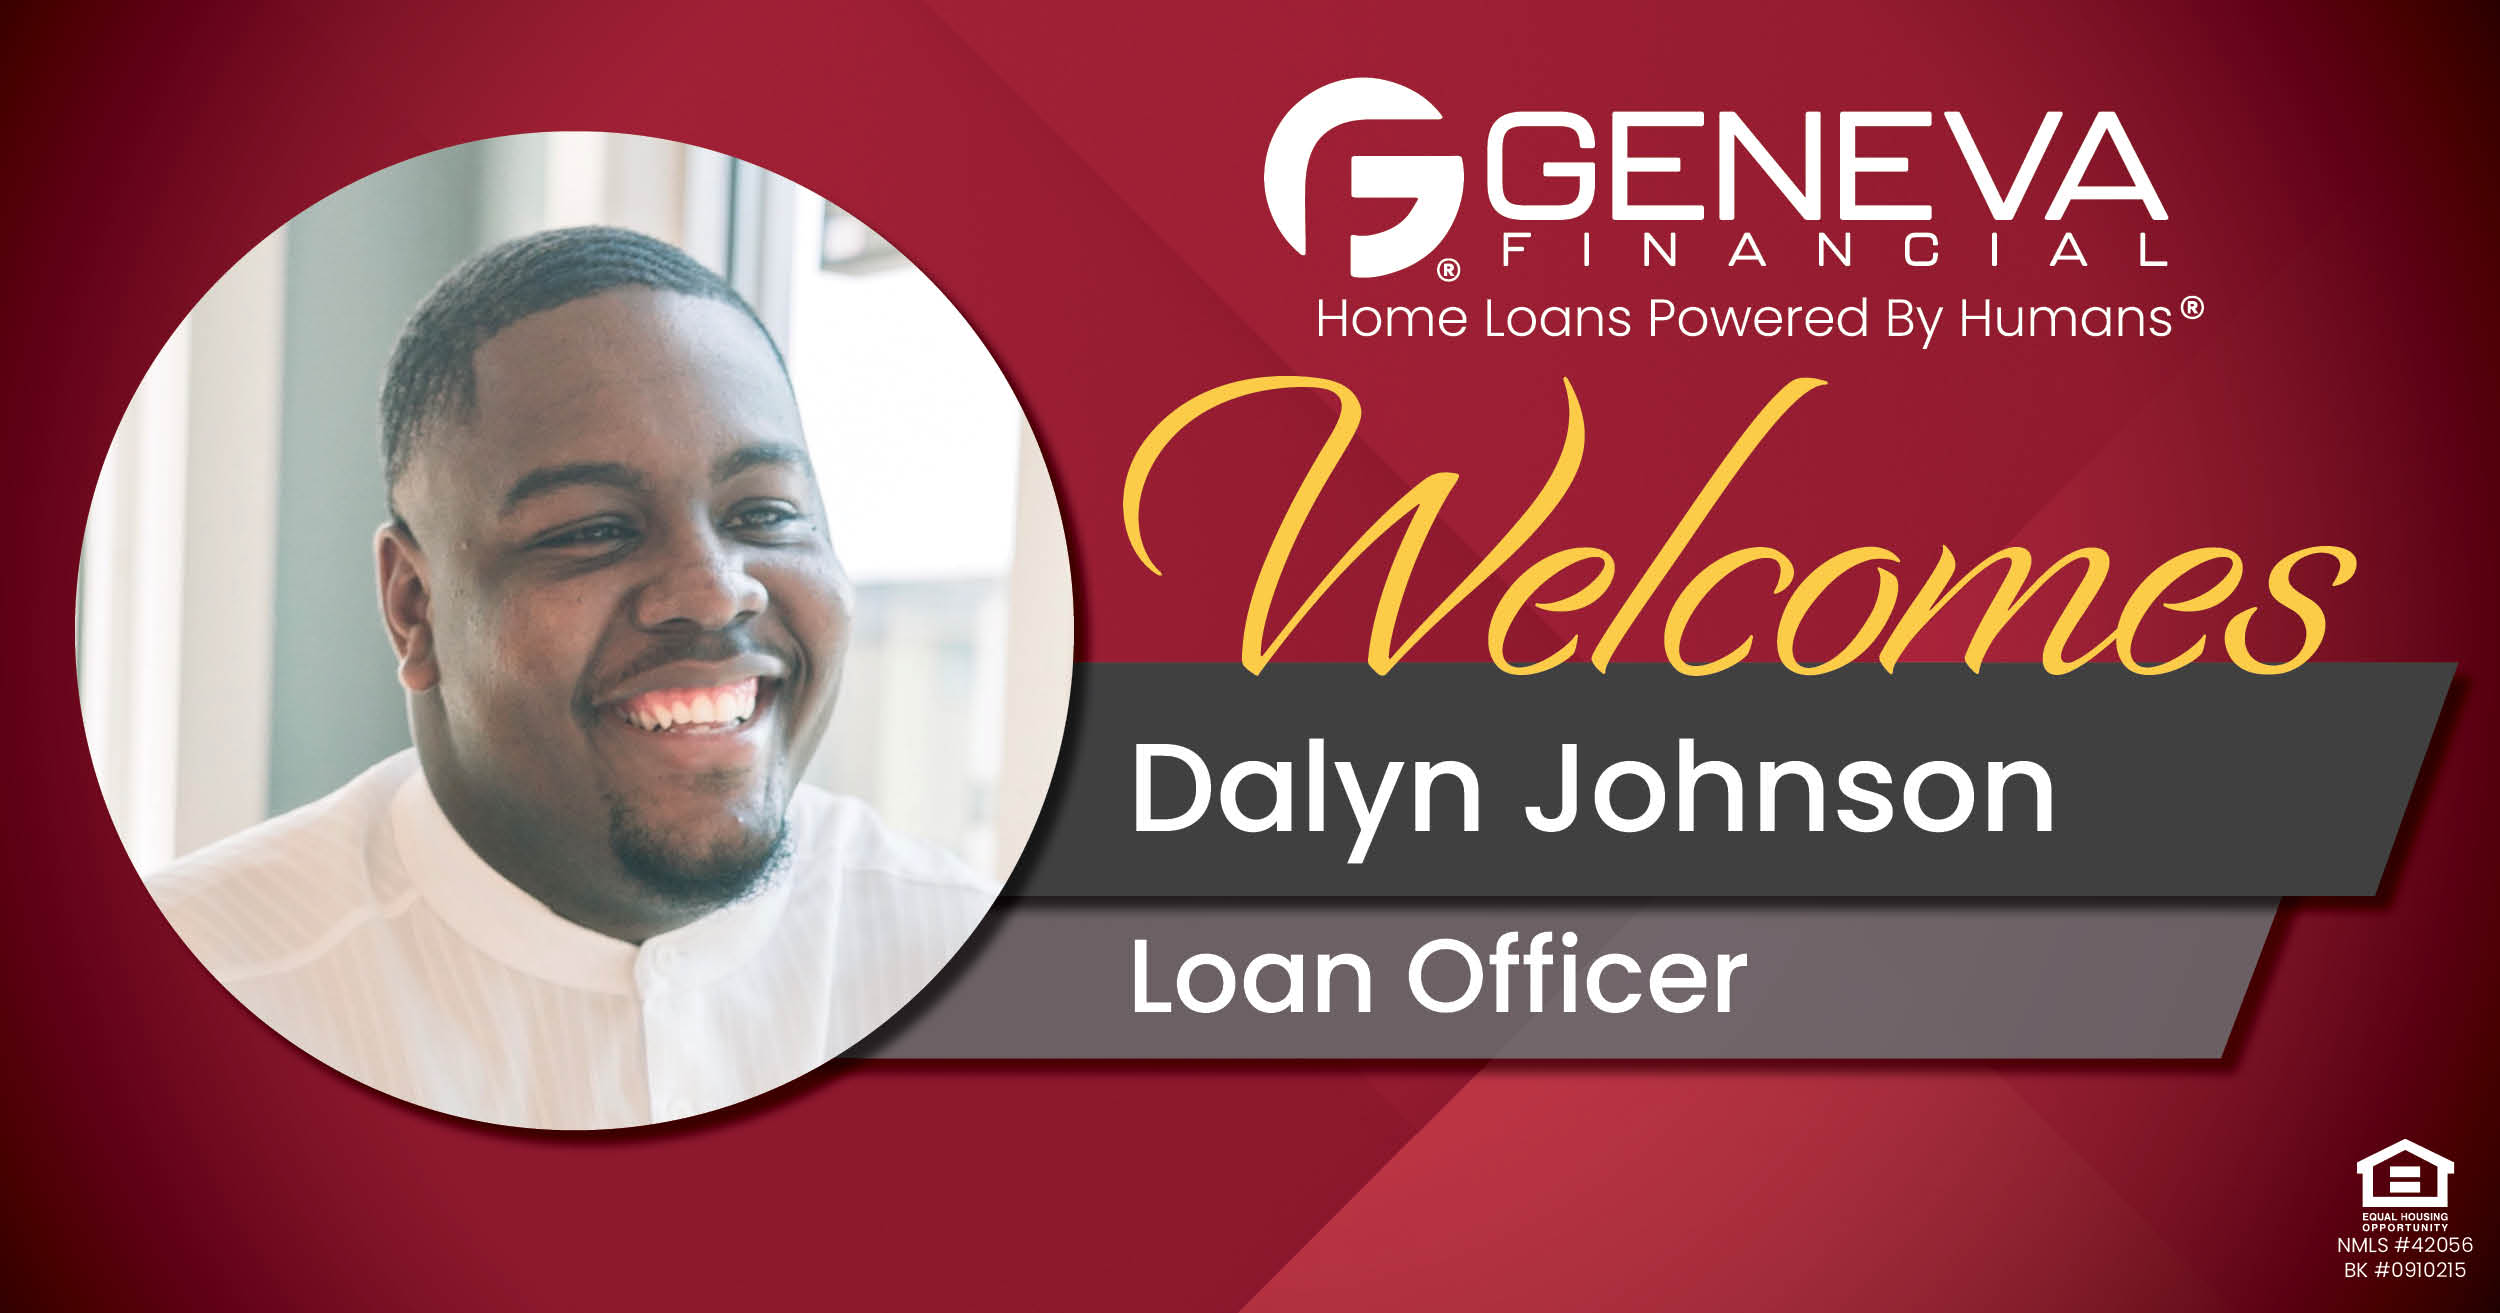 Geneva Financial Welcomes New Loan Officer Dalyn Johnson to Fort Wayne, Indiana – Home Loans Powered by Humans®.